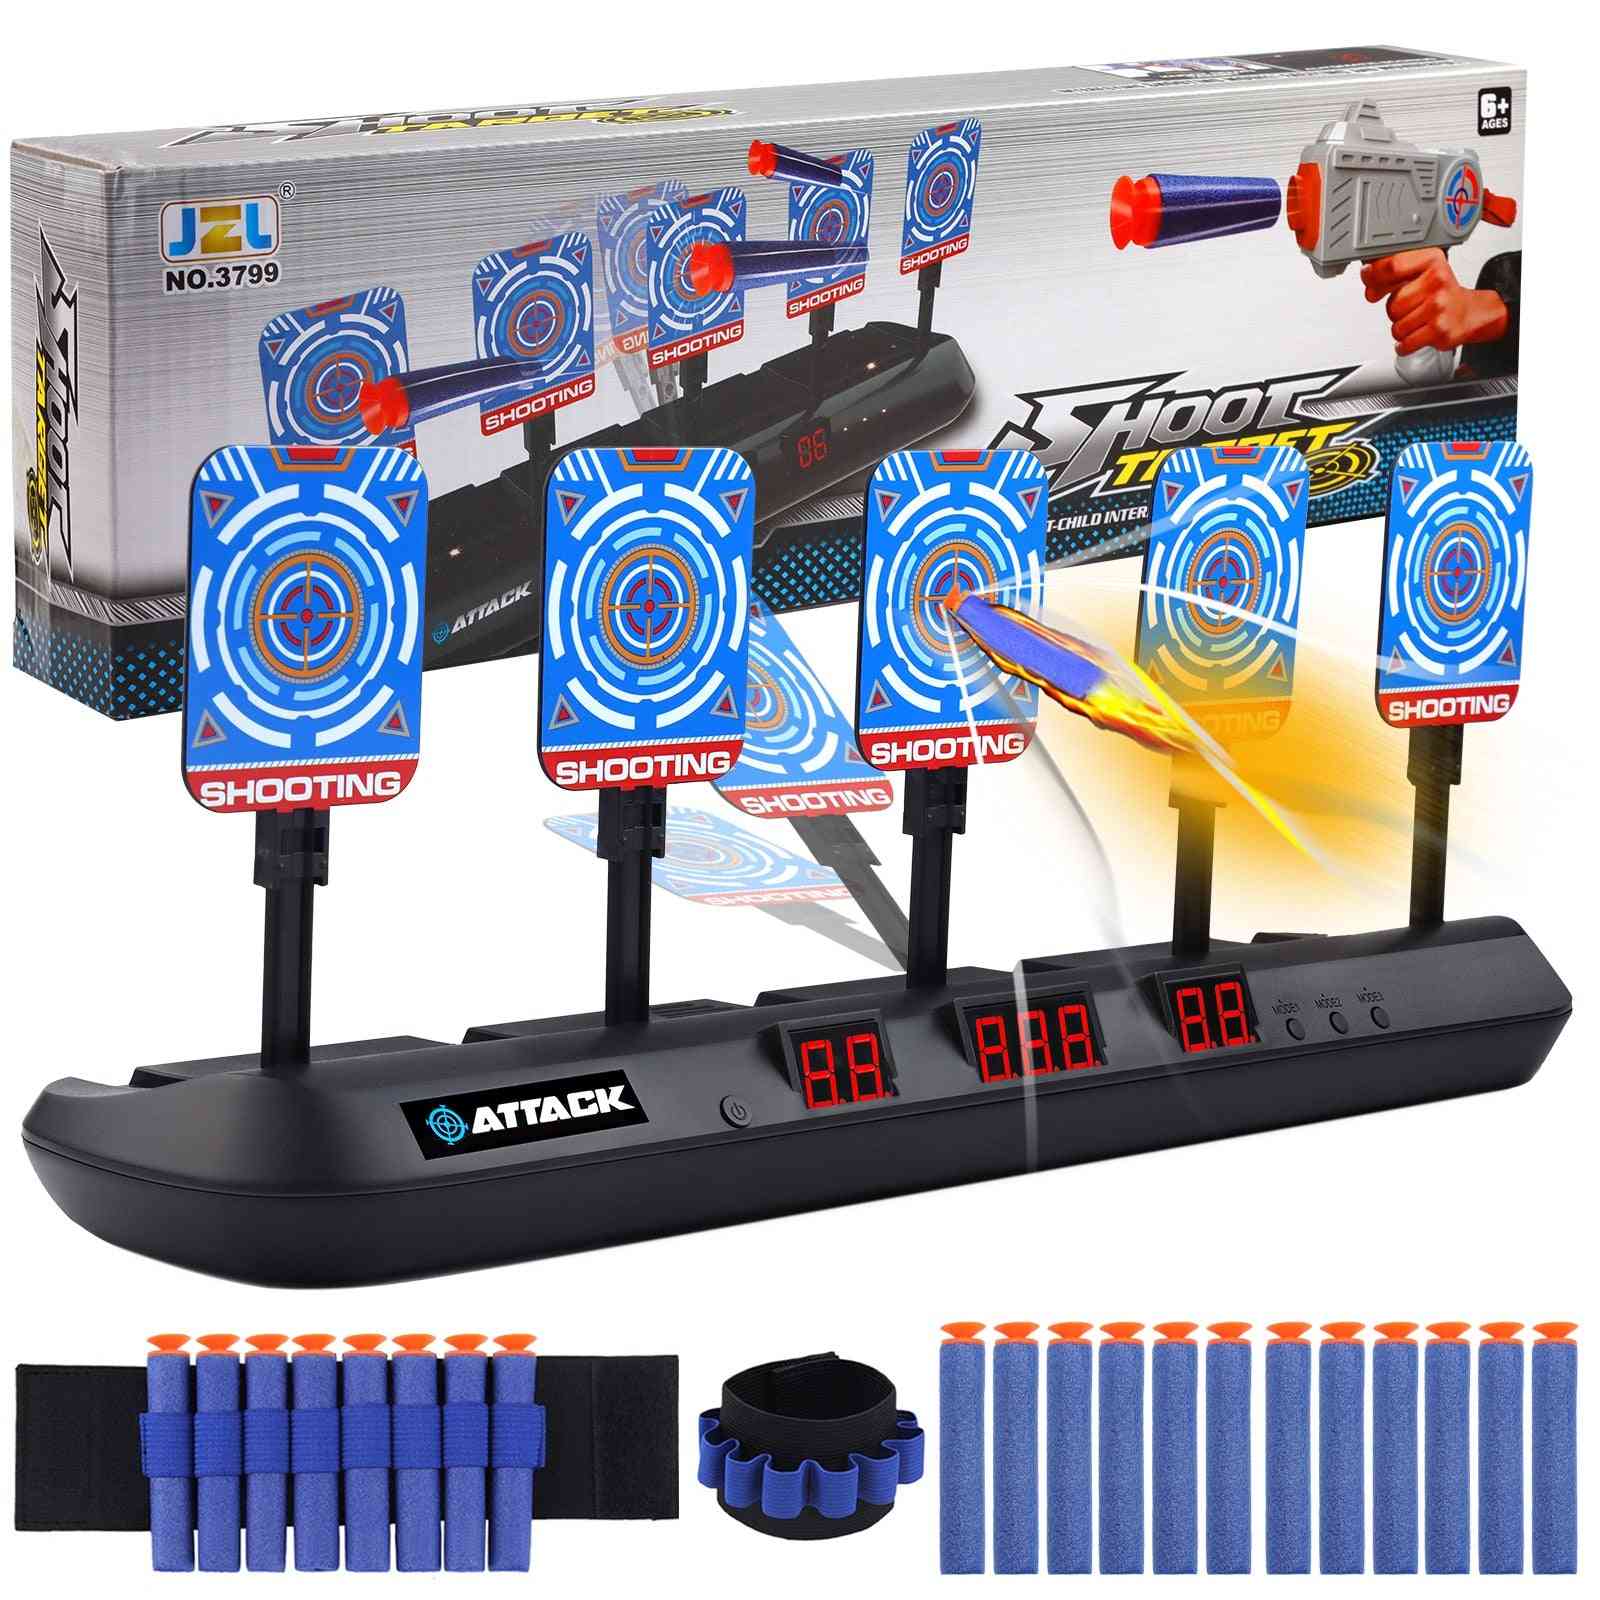 Auto-reset, Electric Scoring Nerf Target Toy With Wristbands, Refill Darts, Light Sound Effect For Shooting Game